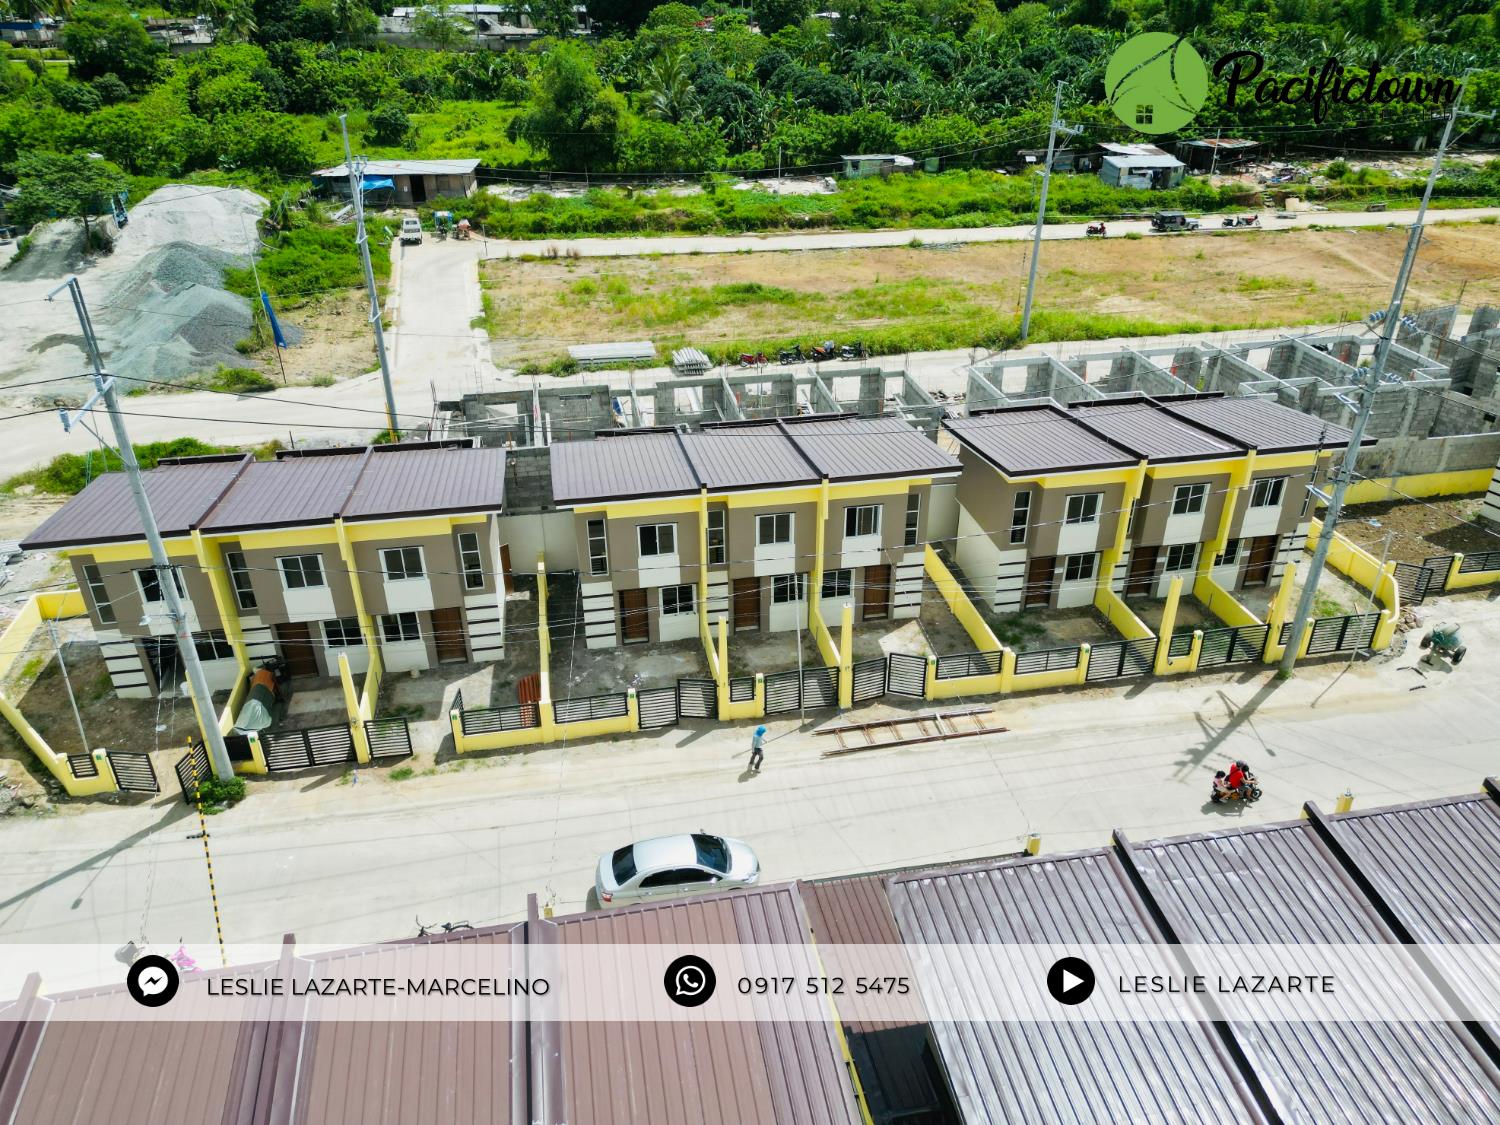 Amenities of Pacifictown Executive Village - Townhouse End | House and Lot for Sale Pag-IBIG Trece Martires Cavite | Pacifictown Property Ventures Inc